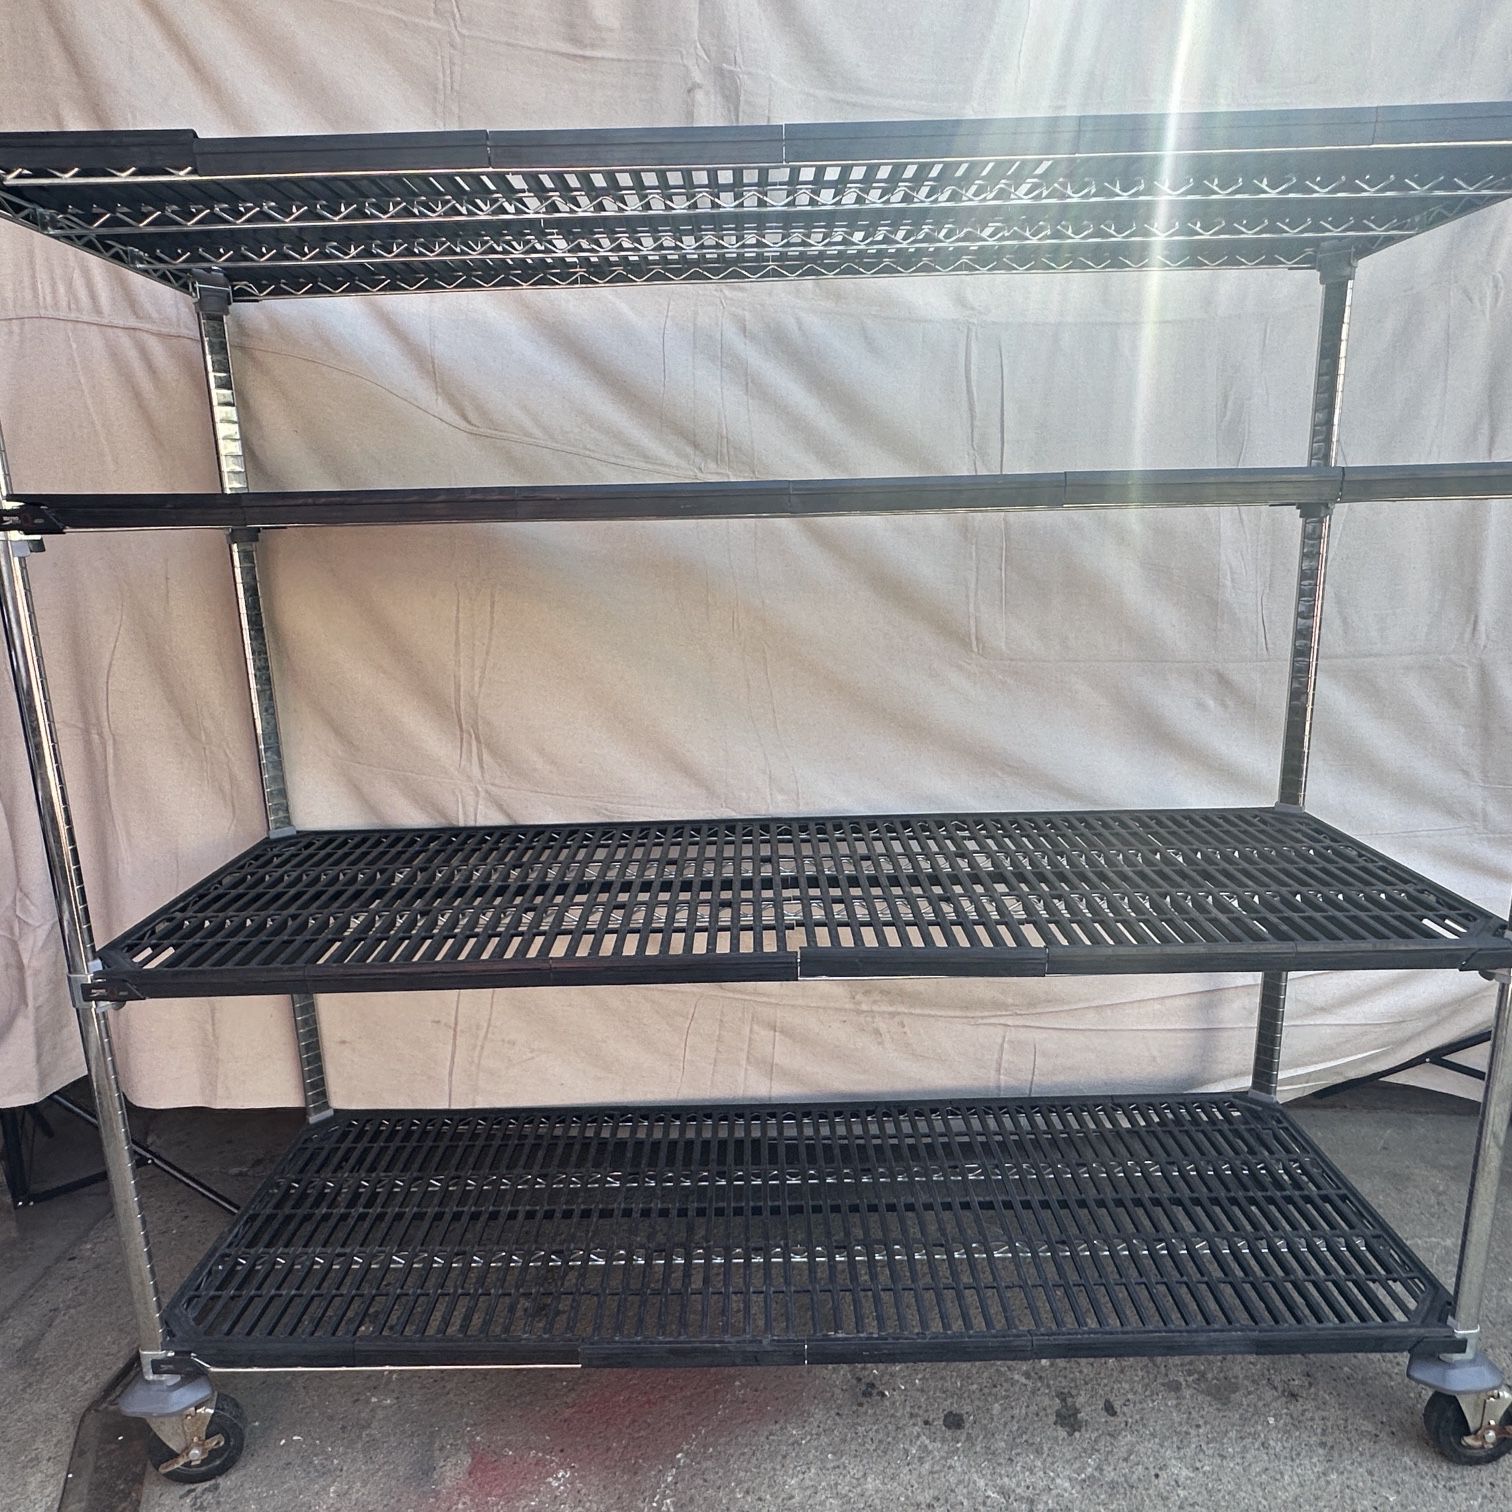 4-Shelf Industrial / Food Service Metal Cart With Snap On Plastic Shelf Covers 